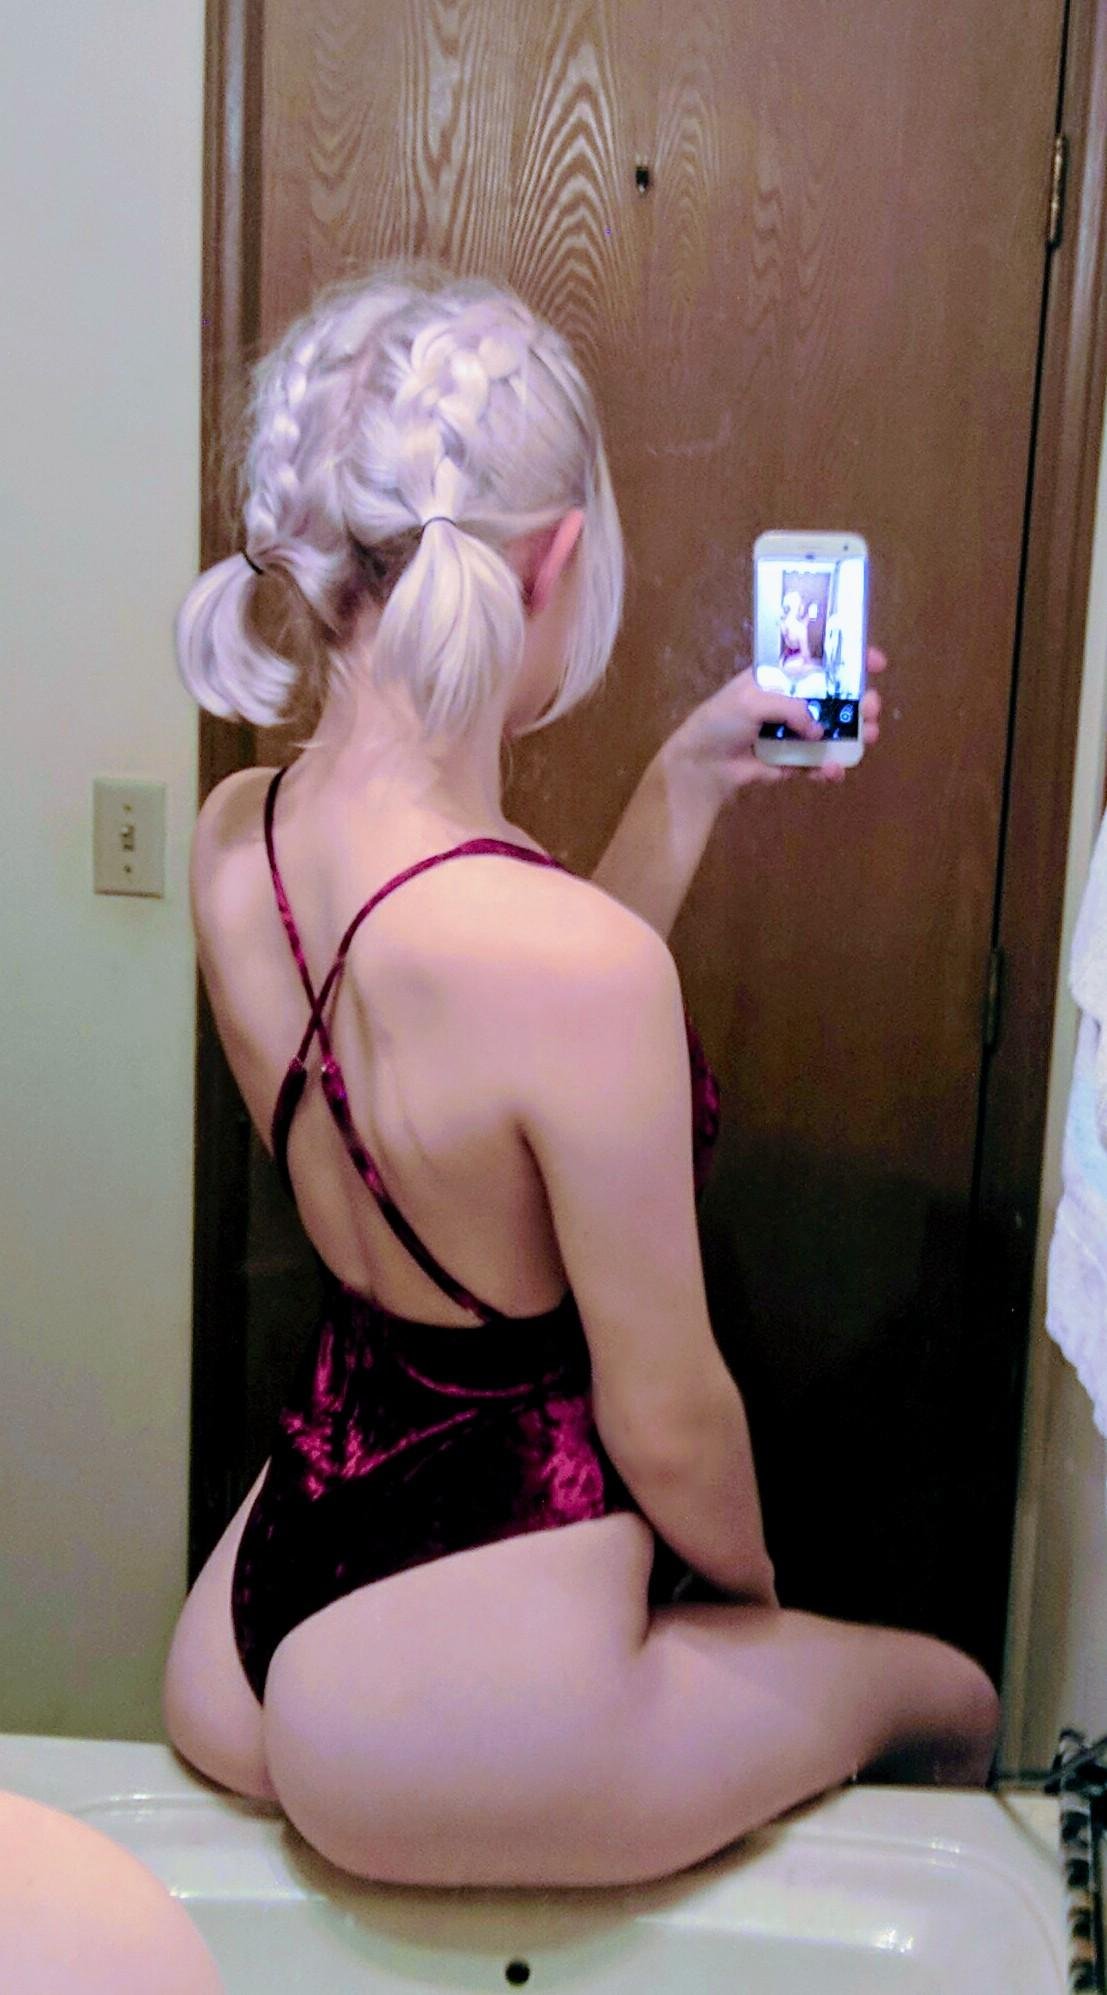 Trying to take an ass/counter pic is really hard when you're a midget.